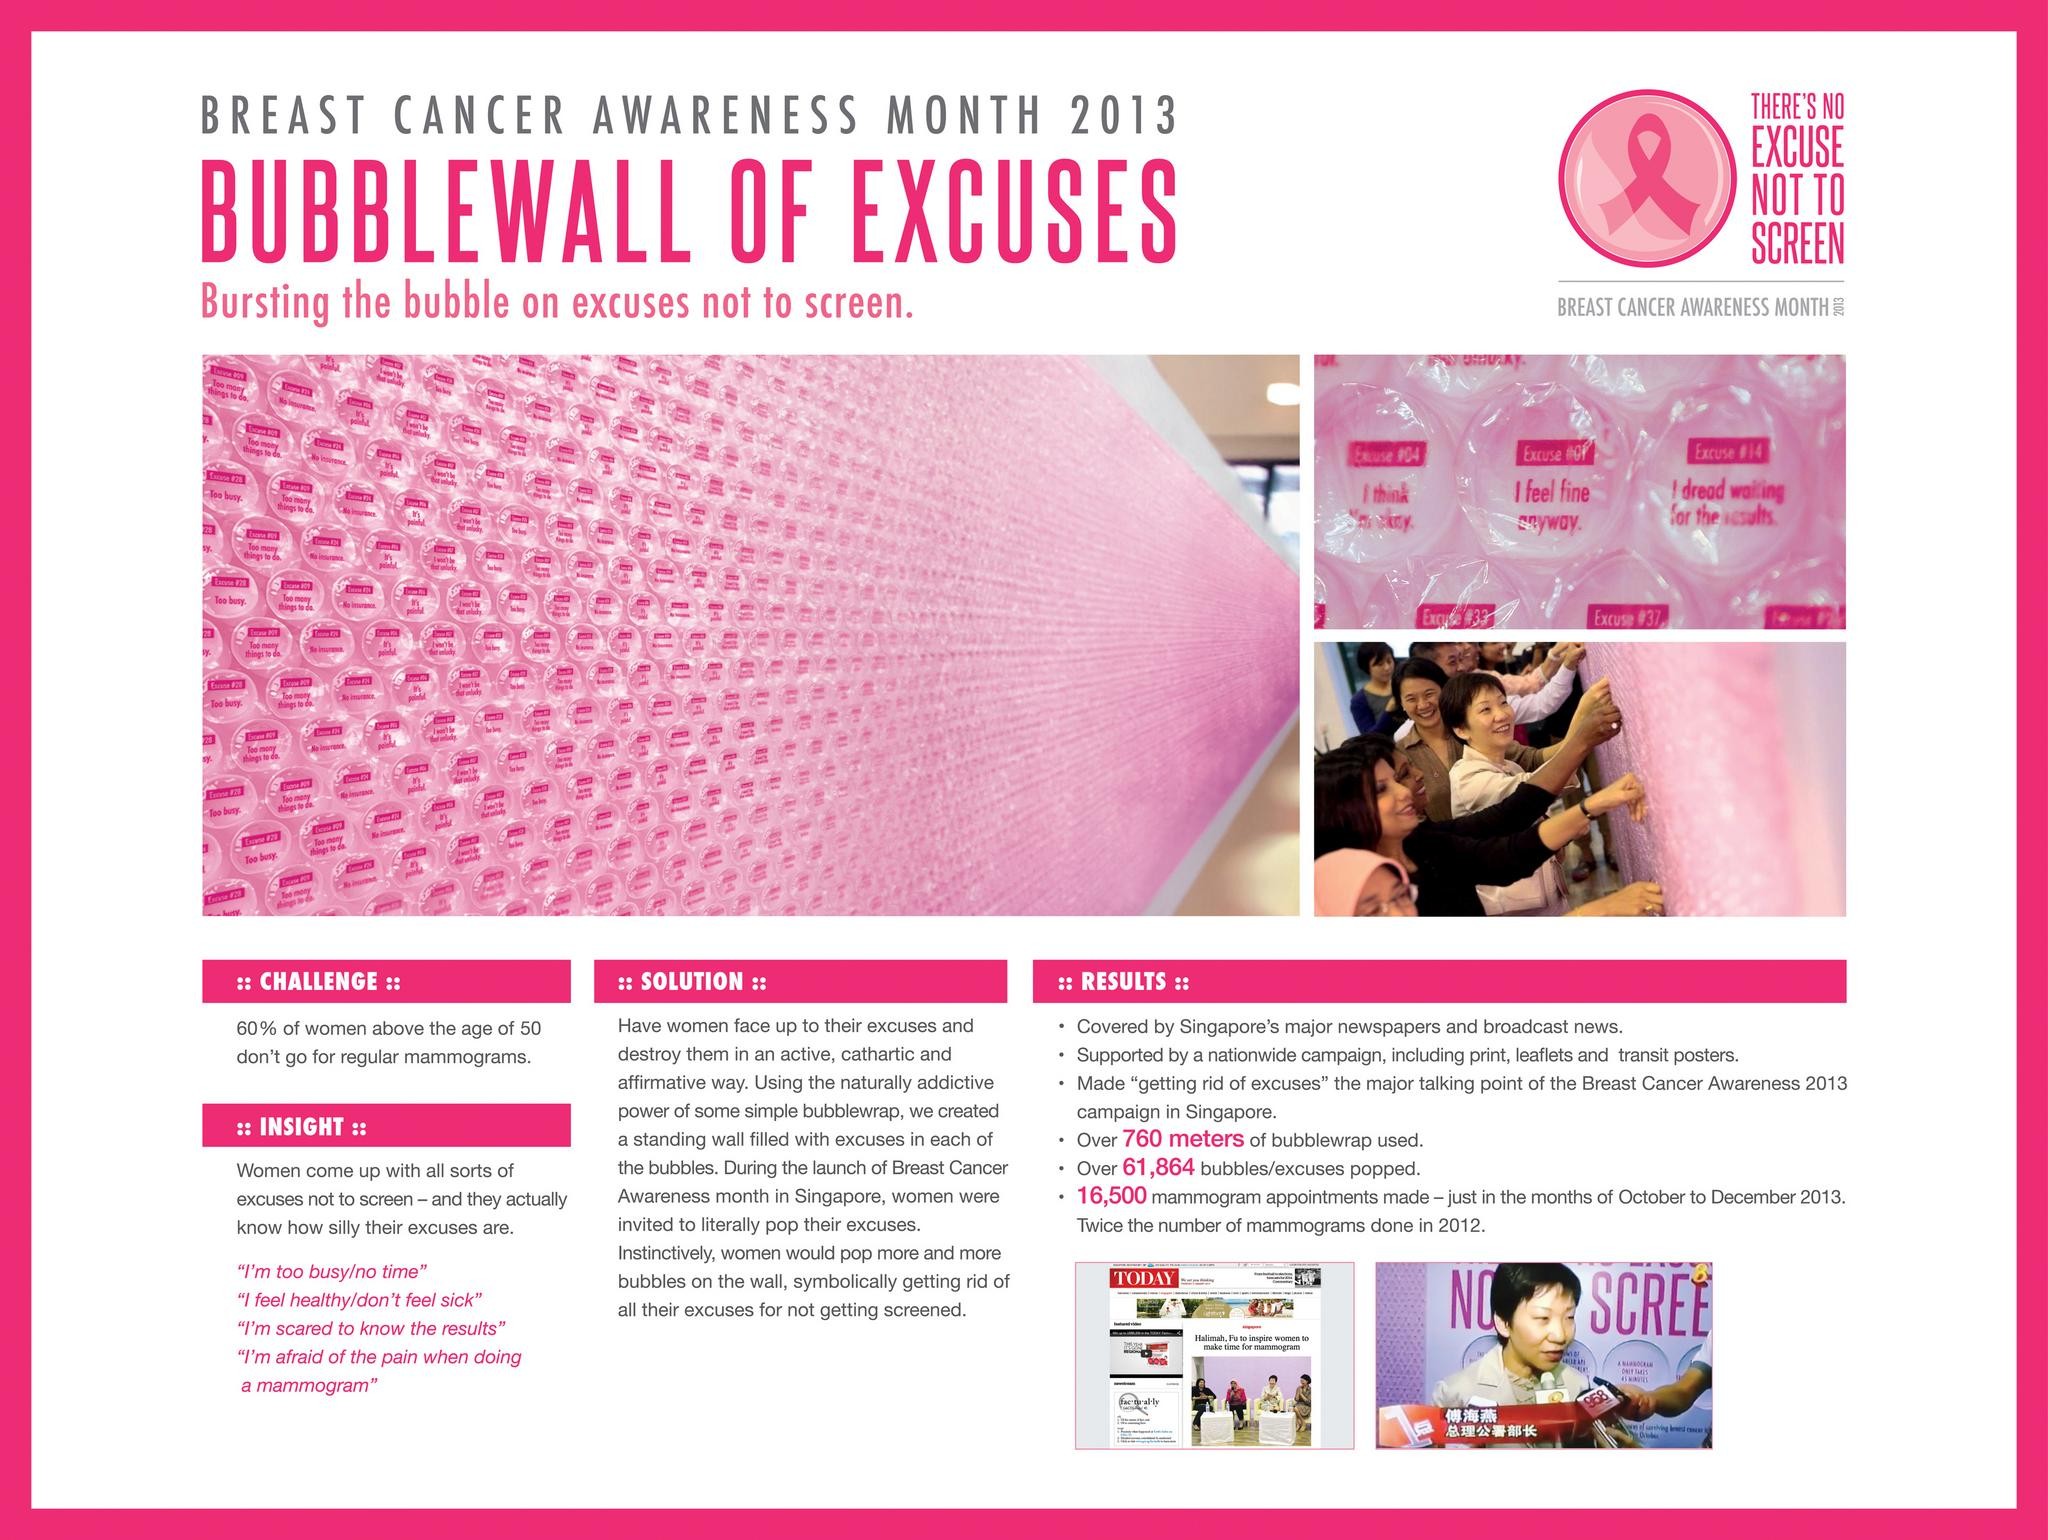 BUBBLEWALL OF EXCUSES